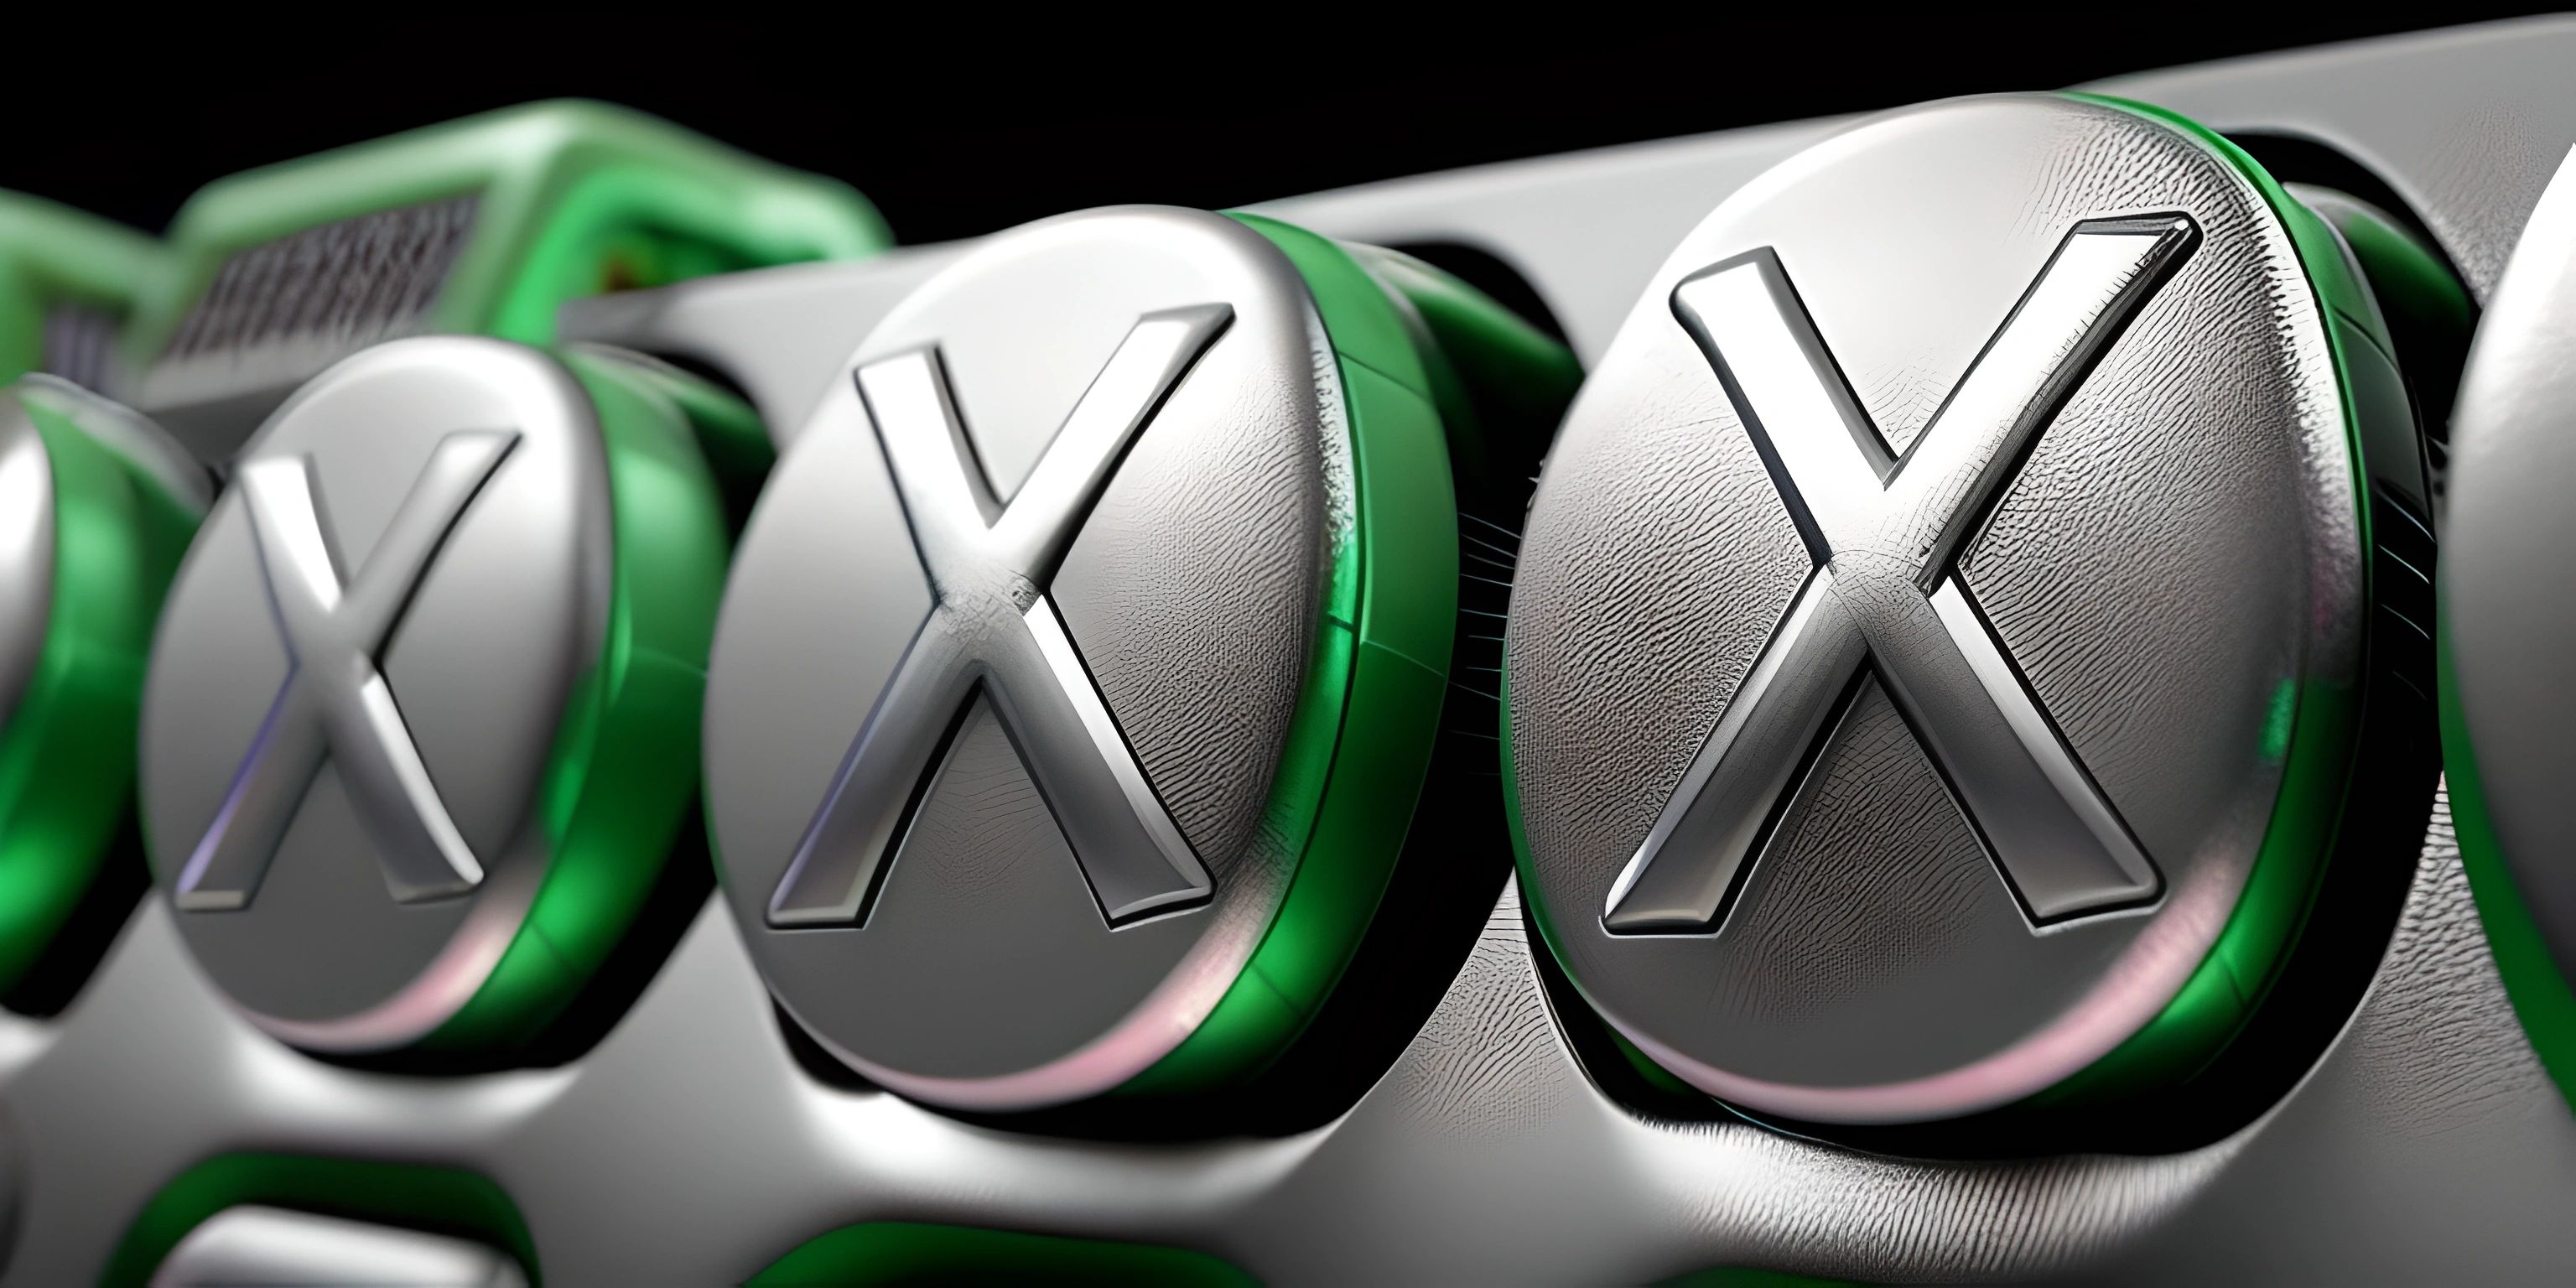 an image of xbox remote buttons closeup in action in front of black background with green illumination